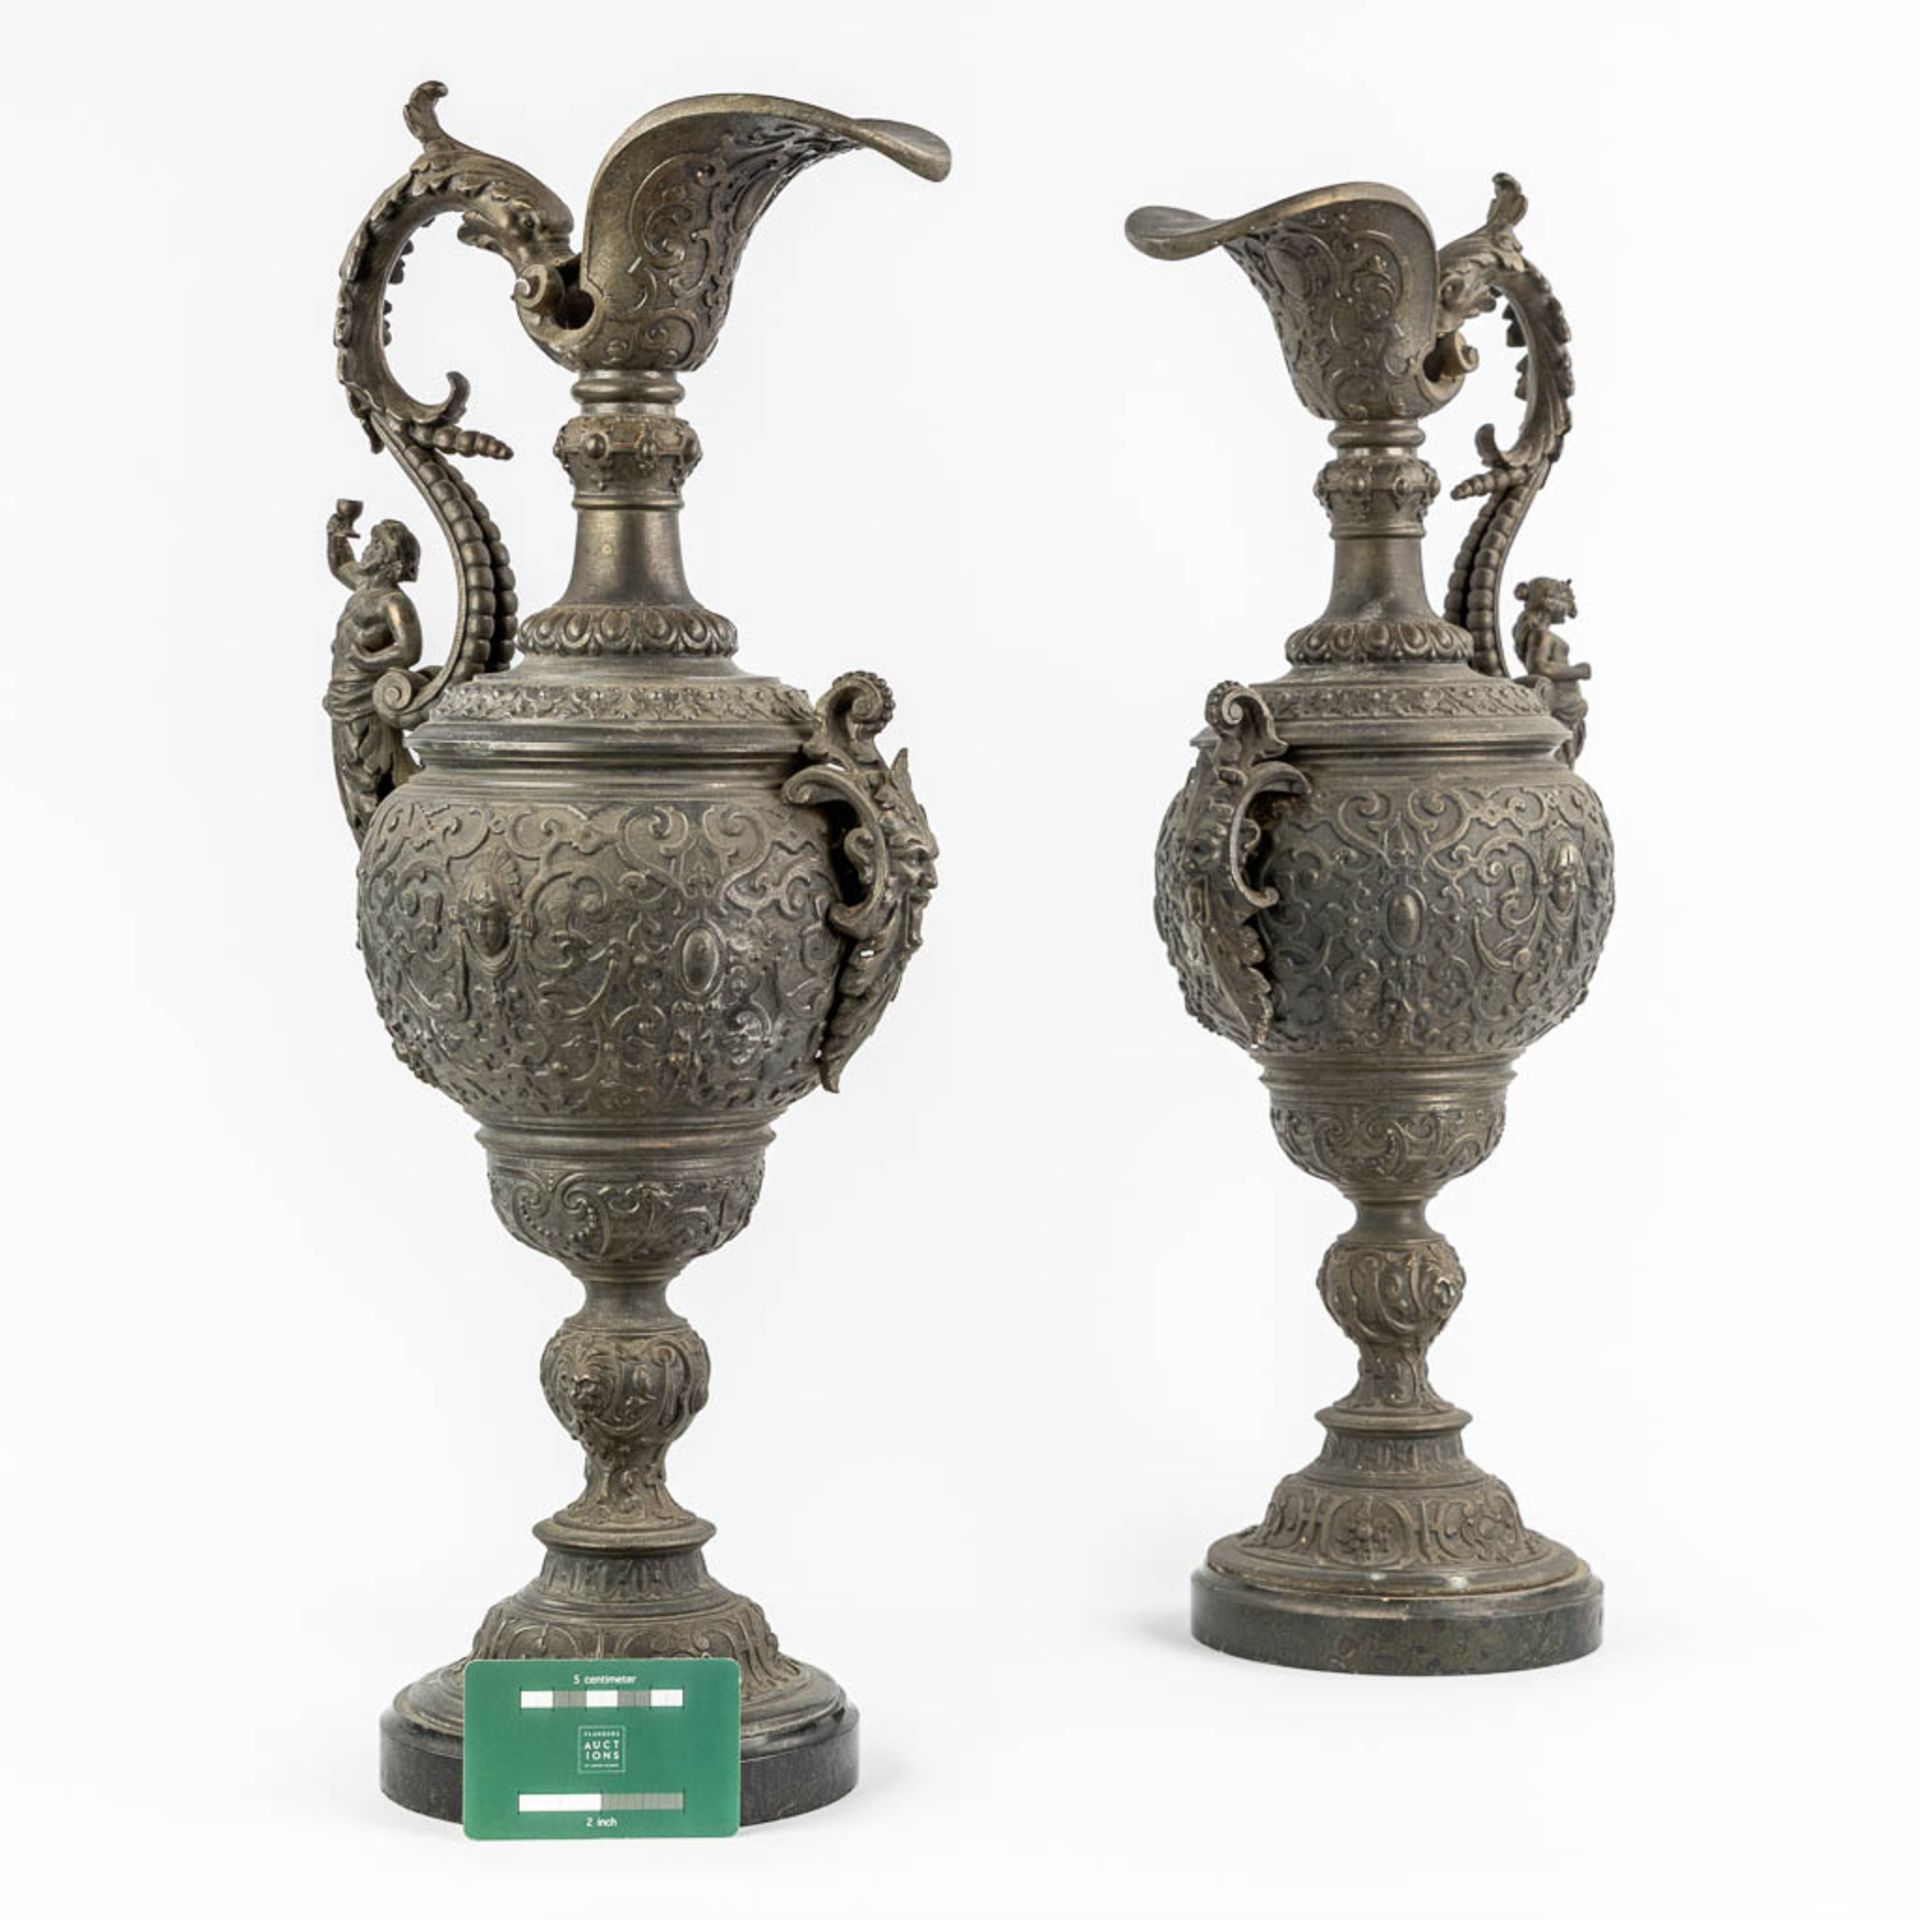 A pair of decorative pitchers, spelter on a marble base. Circa 1900. (L:18 x W:23 x H:56 cm) - Image 2 of 14